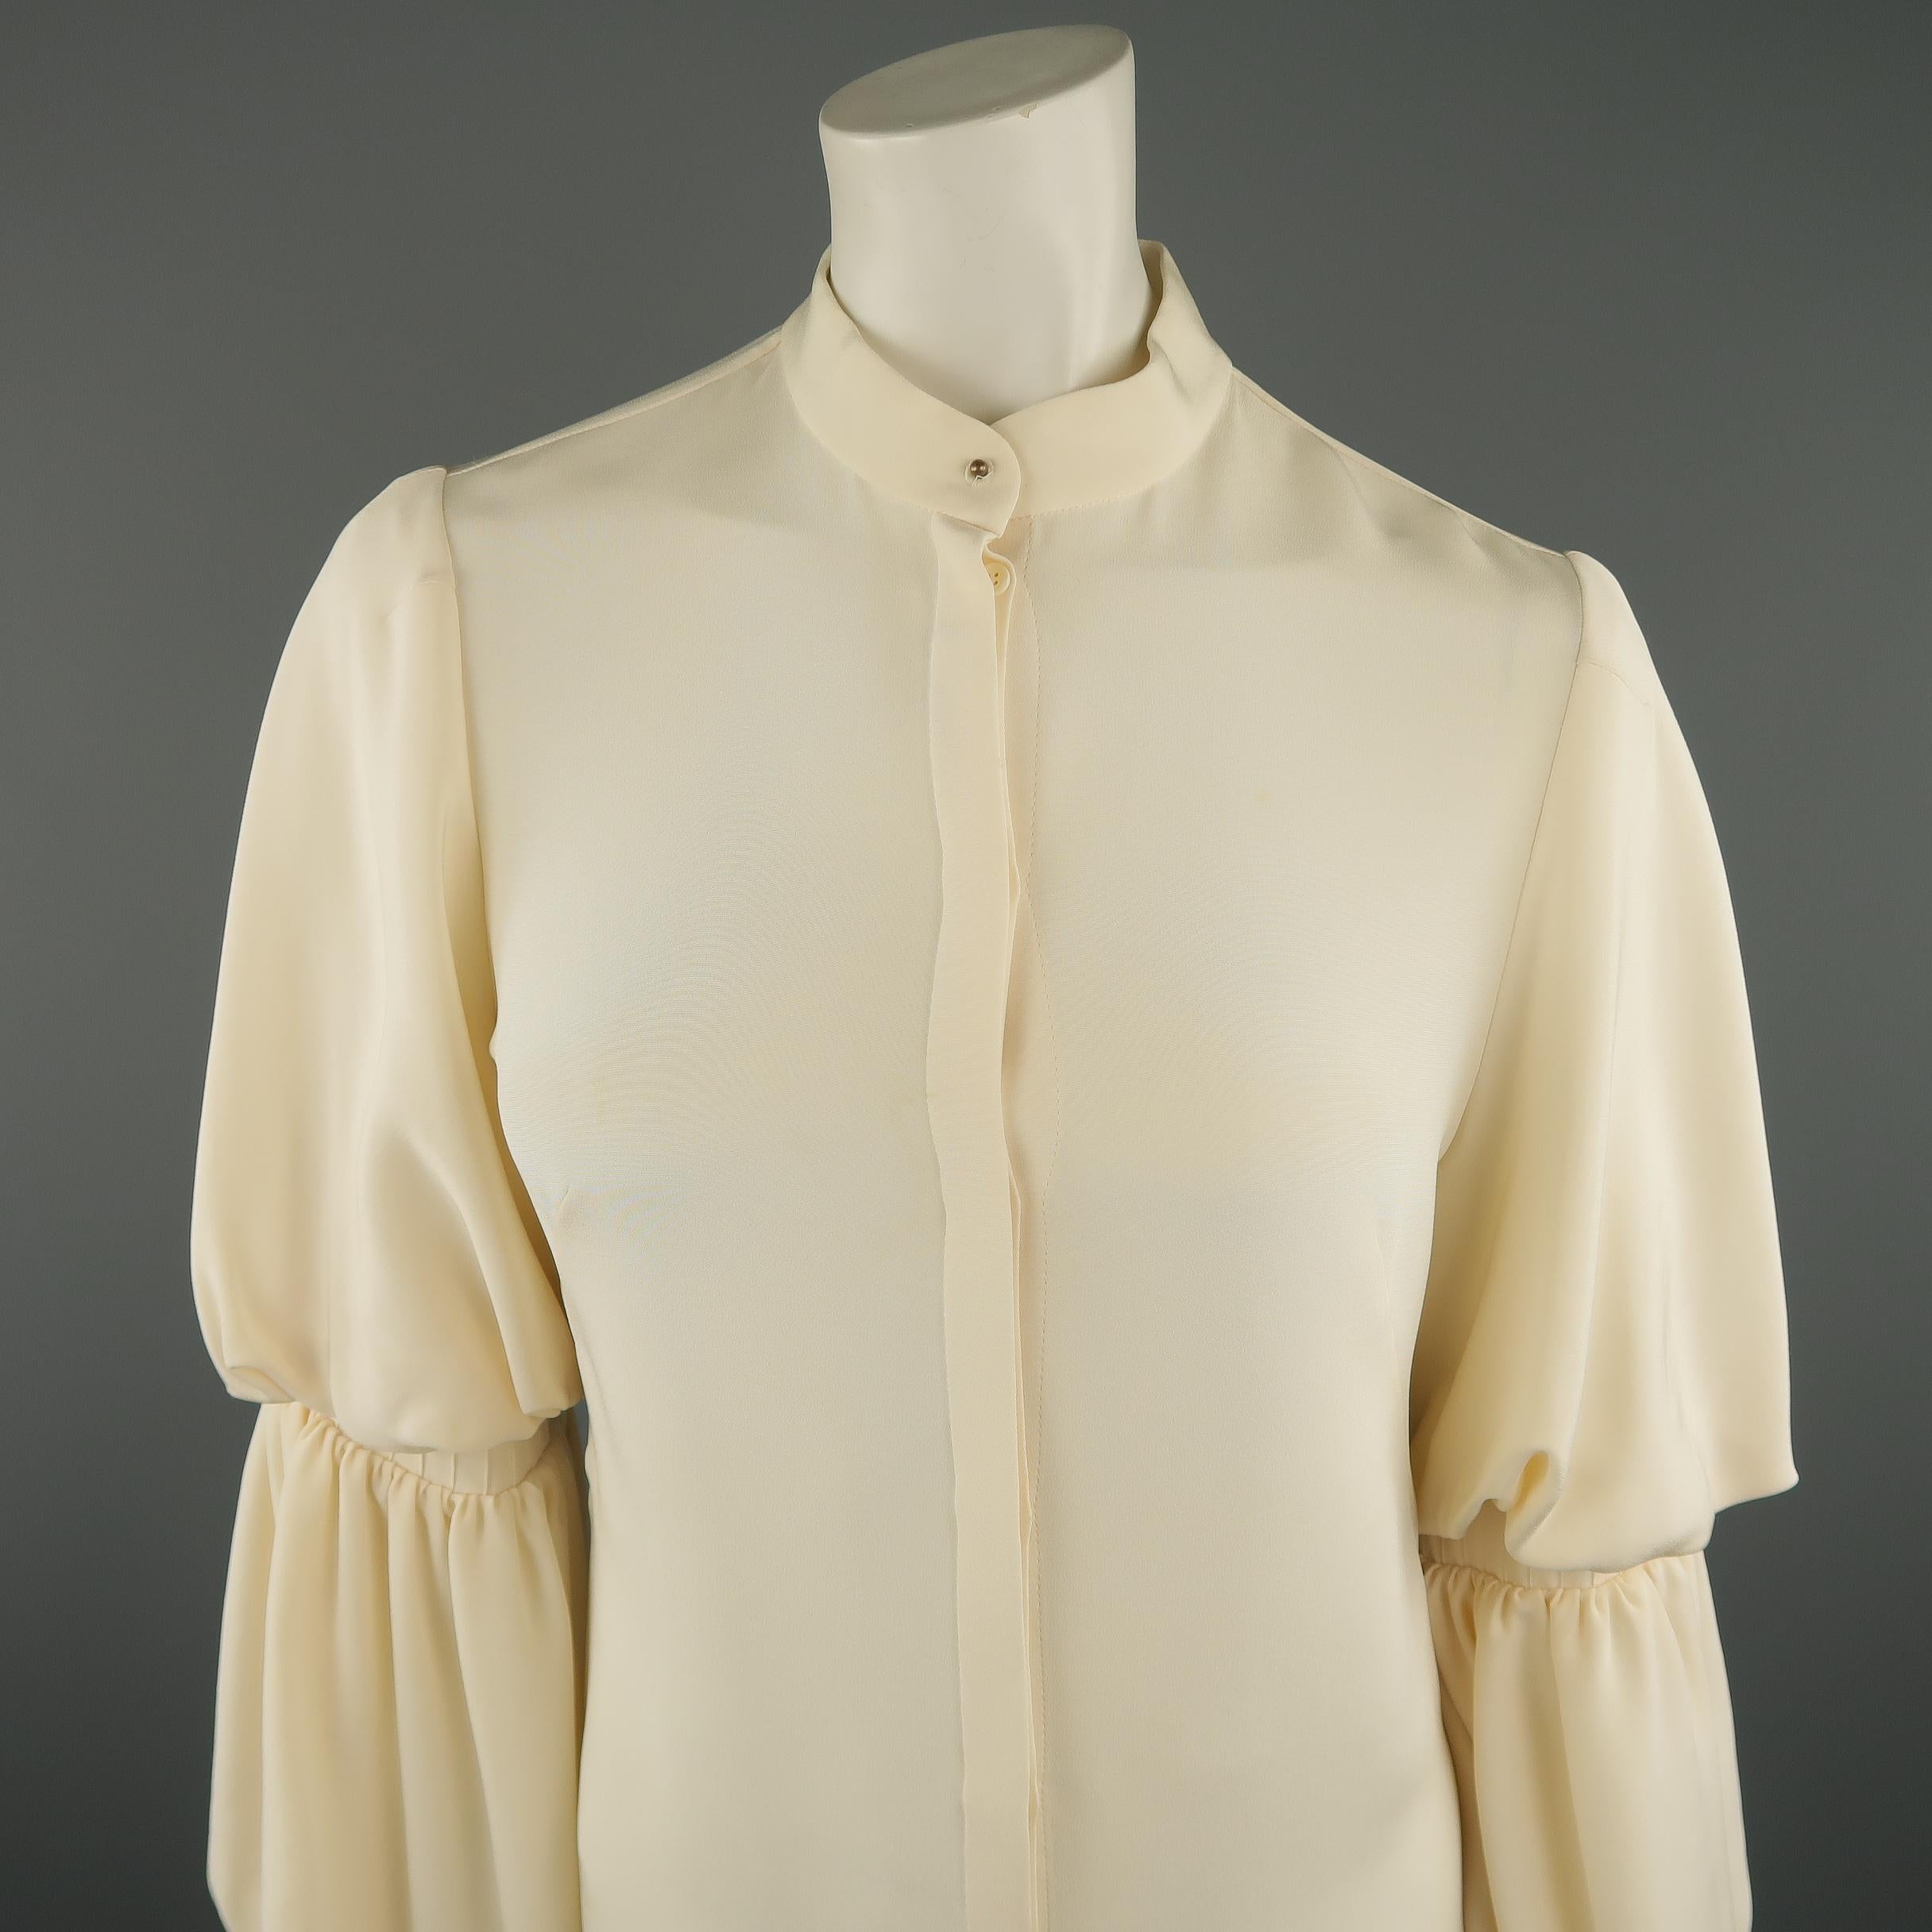 
ALEXANDER MCQUEEN blouse comes in creamy beige silk with a band collar, hidden placket button closure, and layered puff bishop sleeves with pleated ruffle cuffs. Faint discolorations shown in detail shots. Made in Italy.
 
Good Pre-Owned